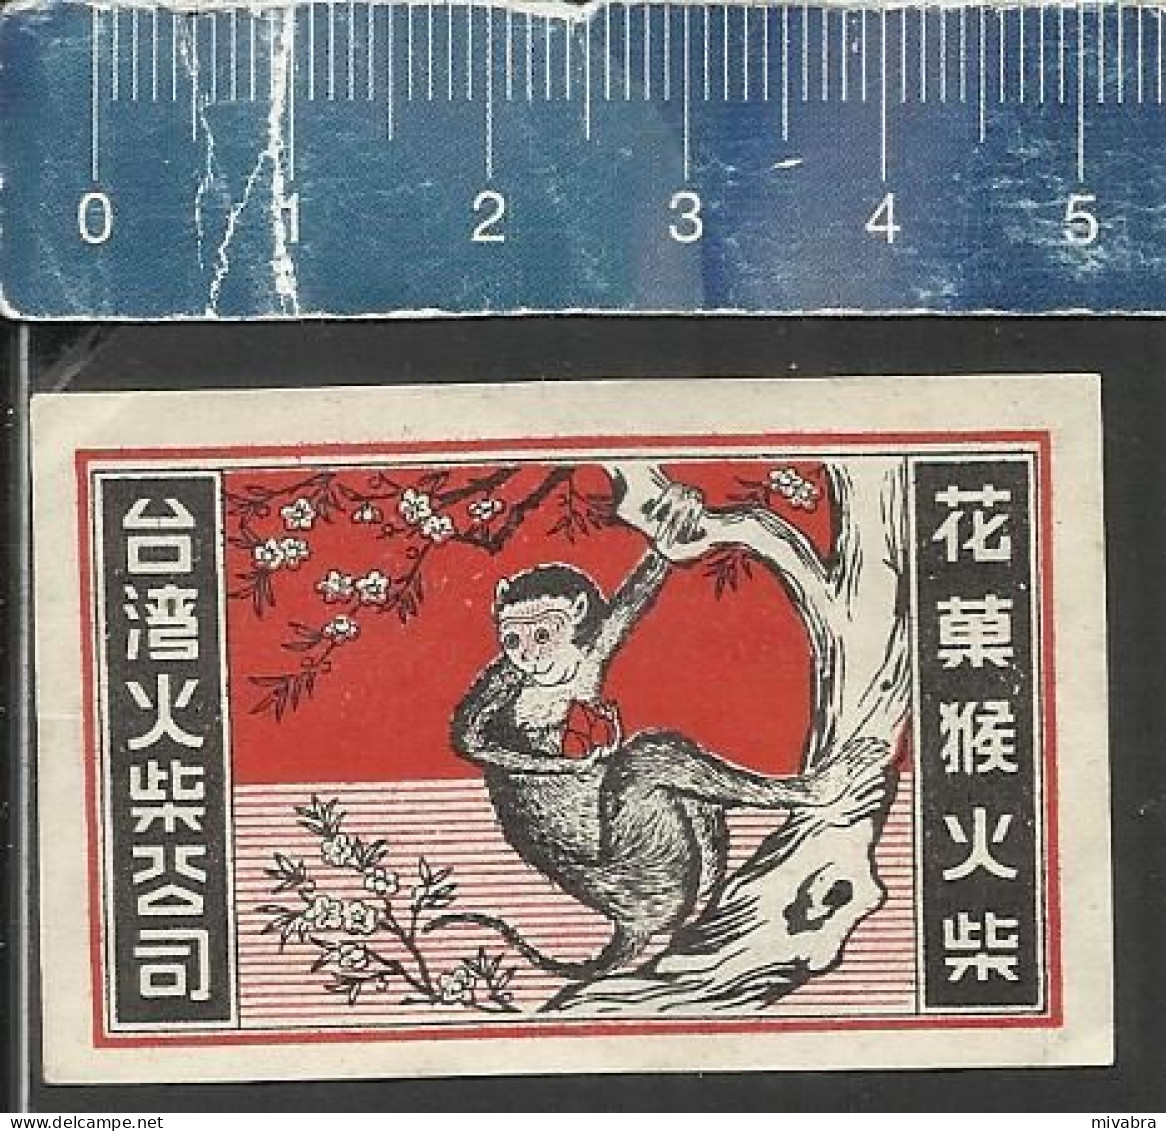 MONKEY CLIMBING A TREE -  OLD VINTAGE MATCHBOX LABEL  MADE IN JAPAN - Matchbox Labels